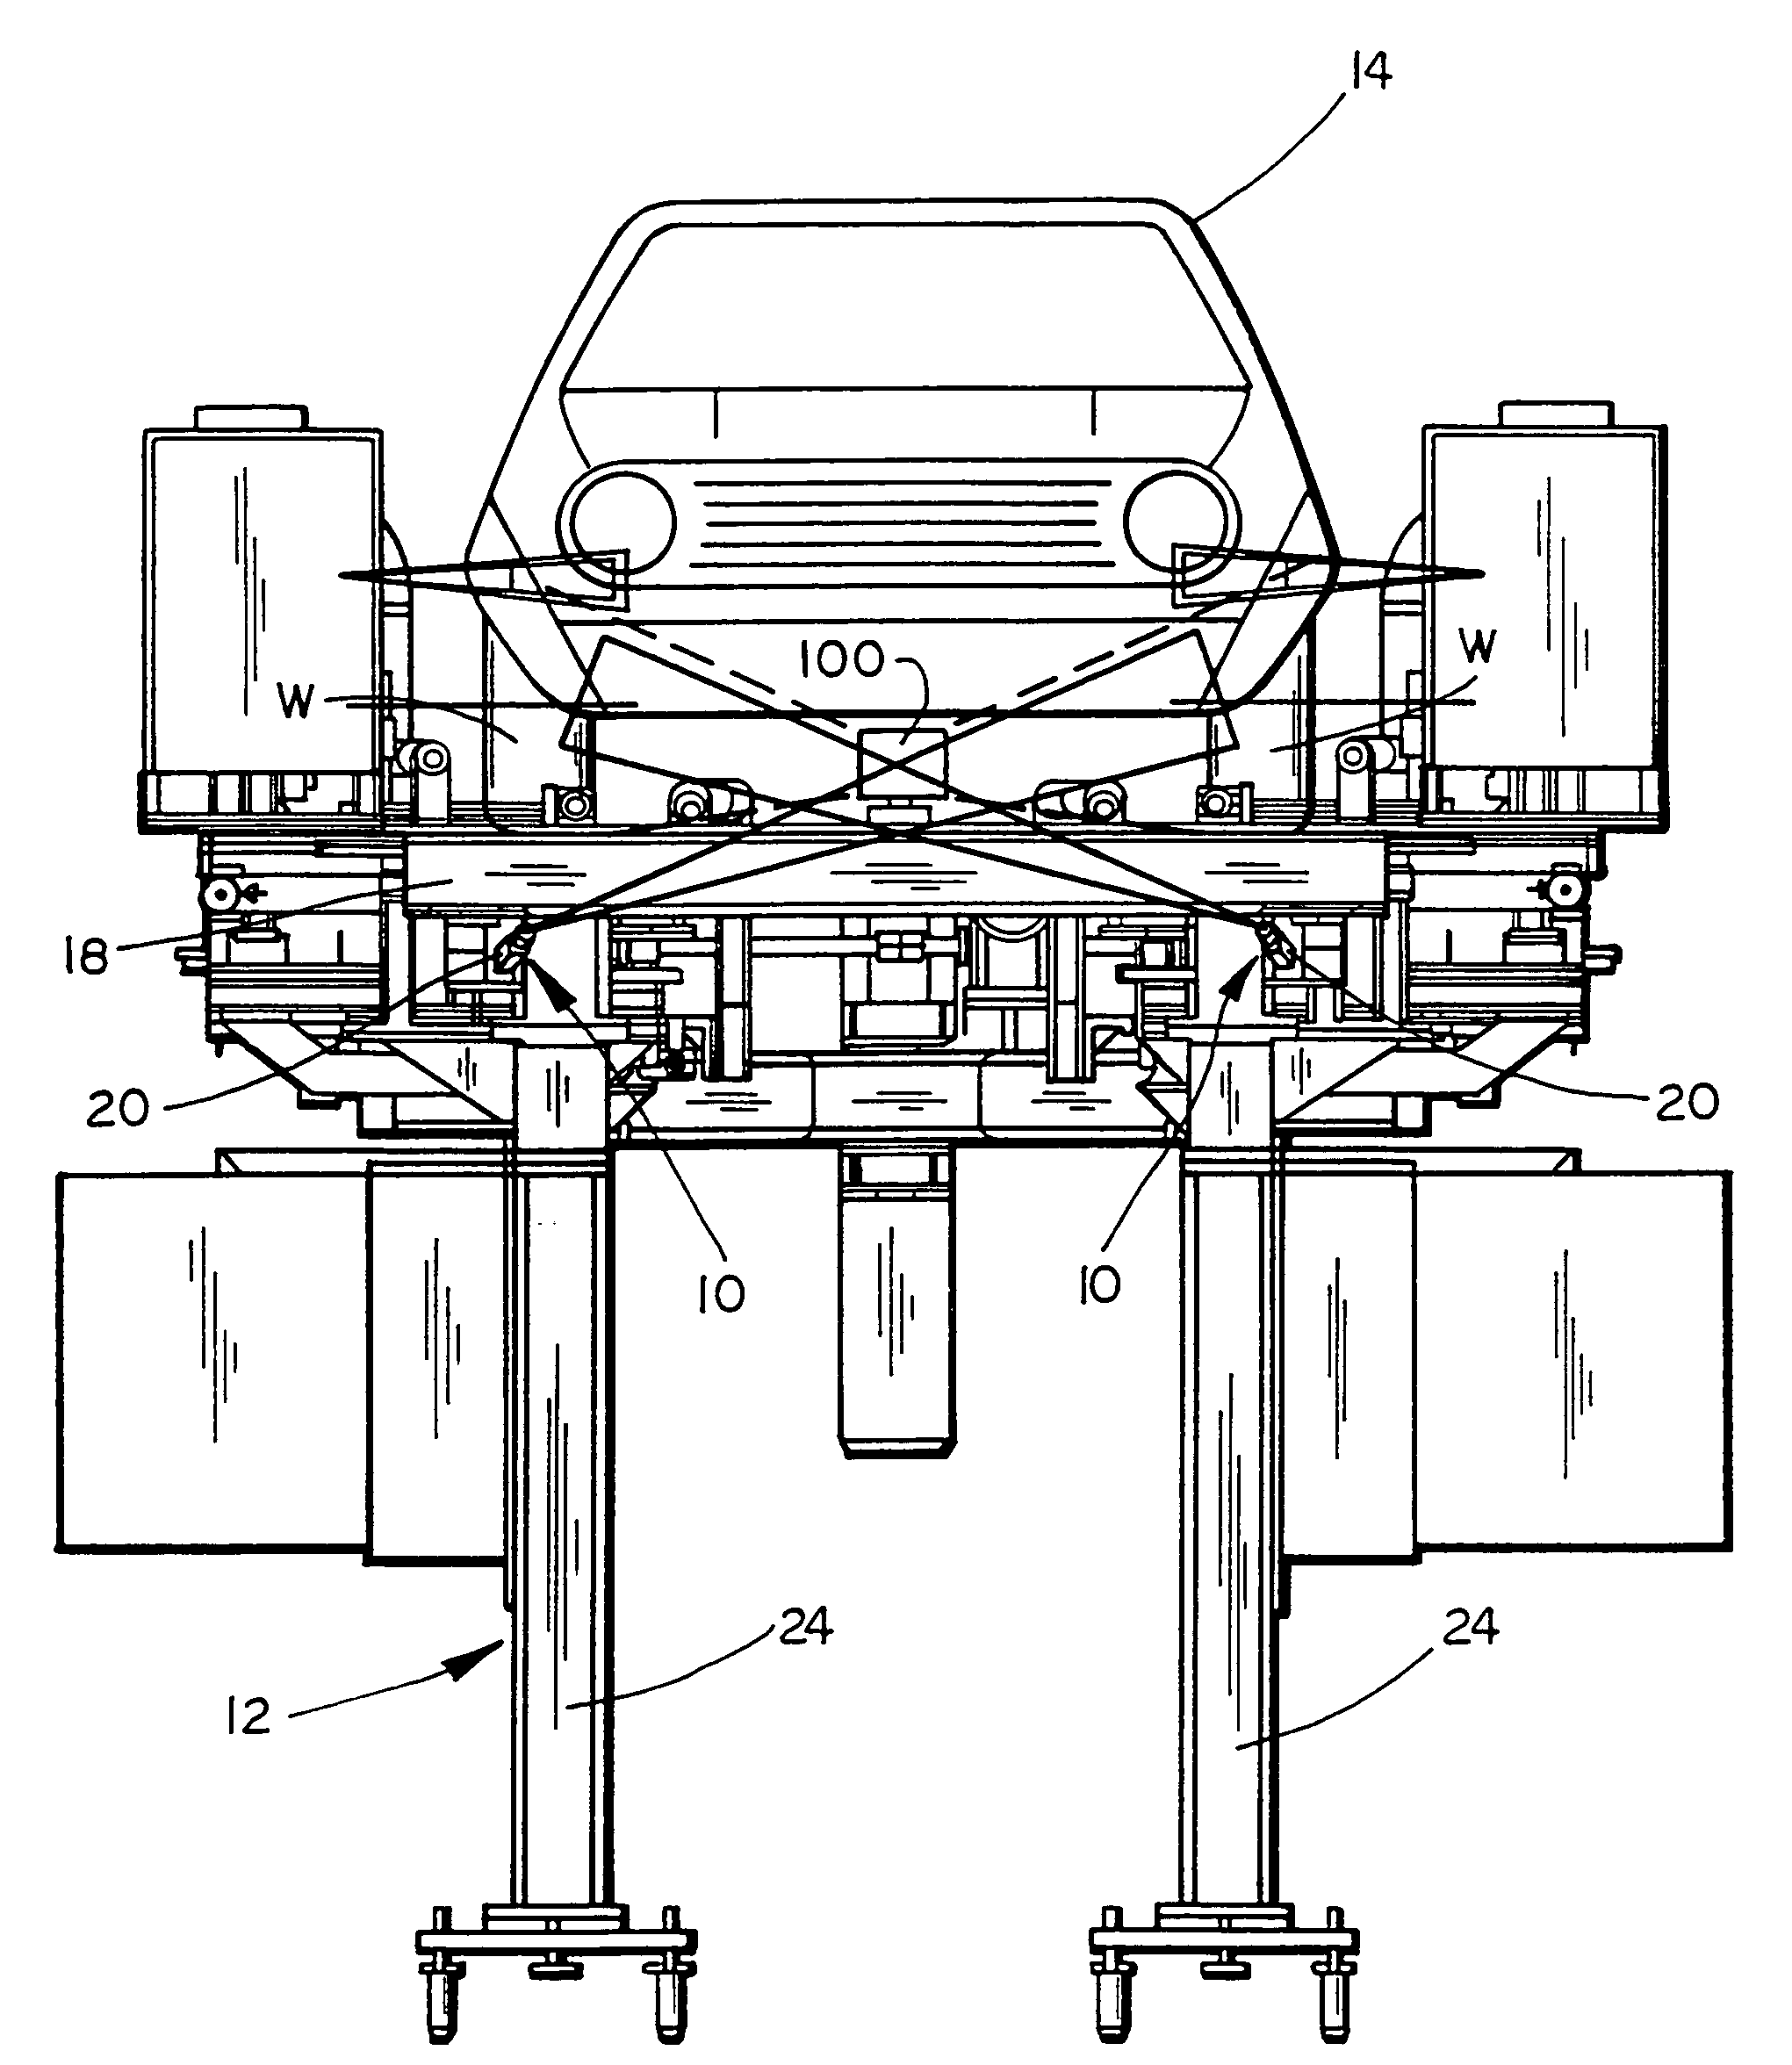 Caster angle measurement system for vehicle wheels